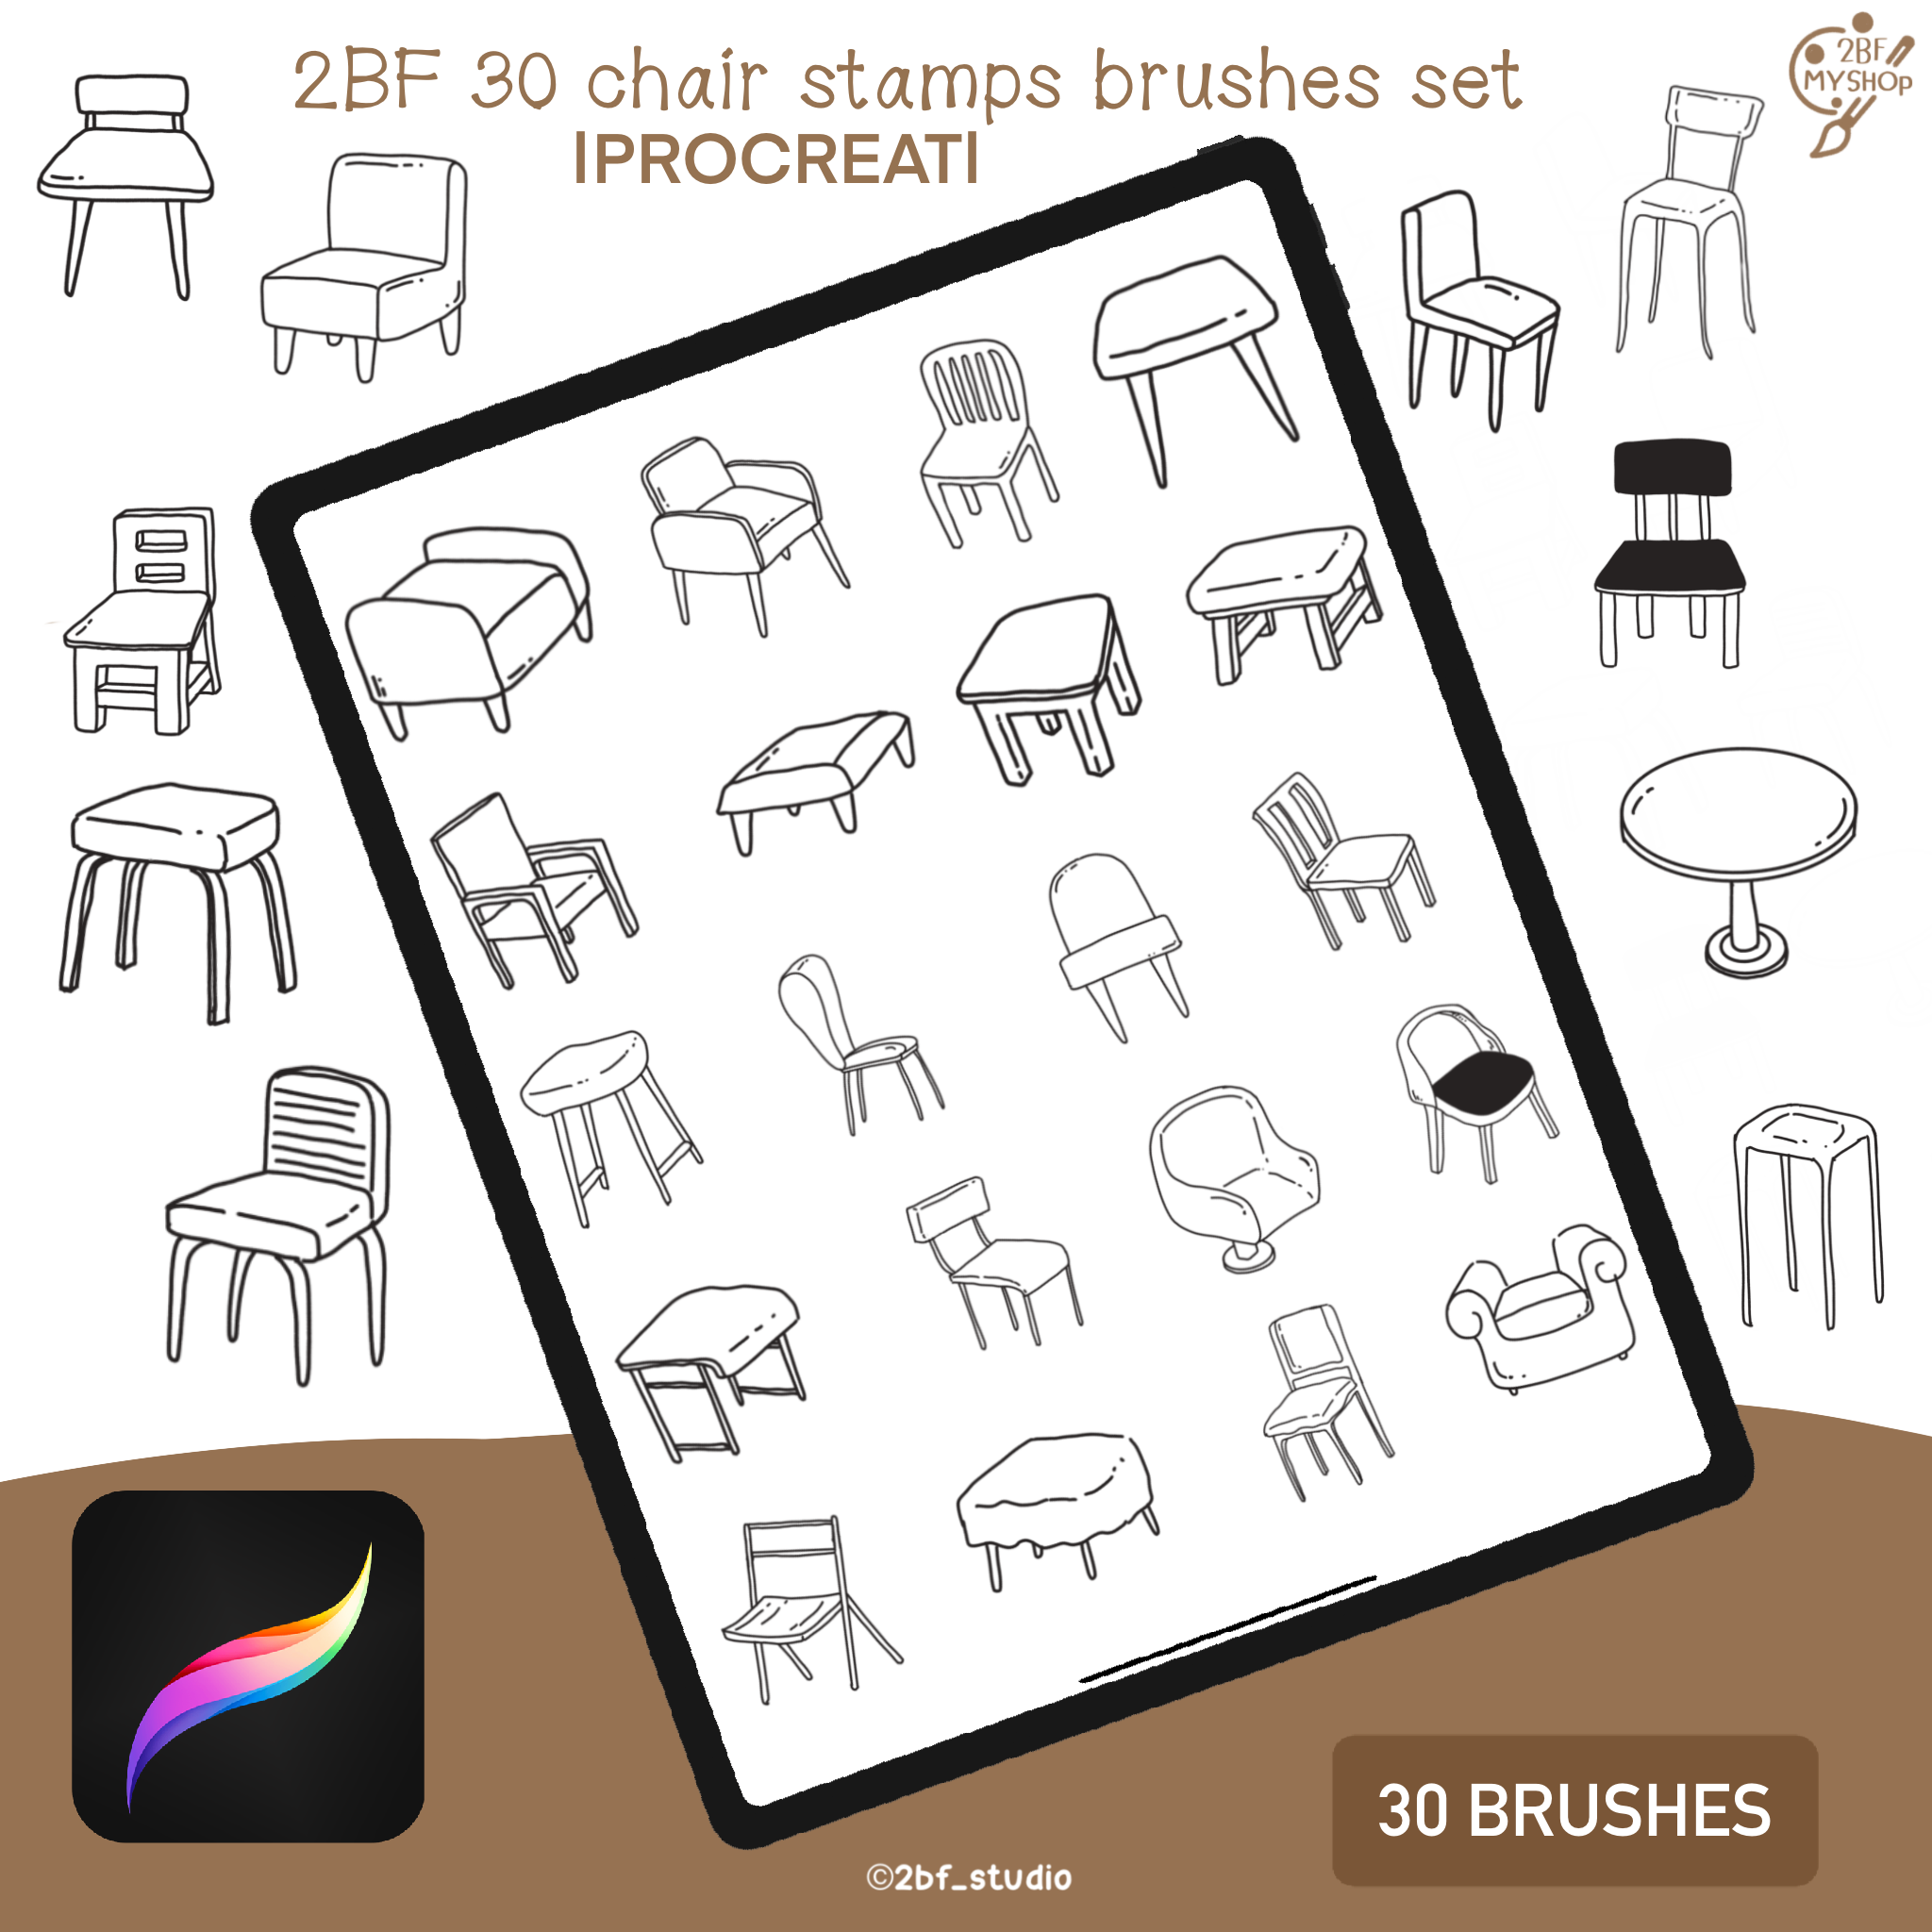 2BF 30 chair stamps brushes set    |PROCREAT BRUSHED|